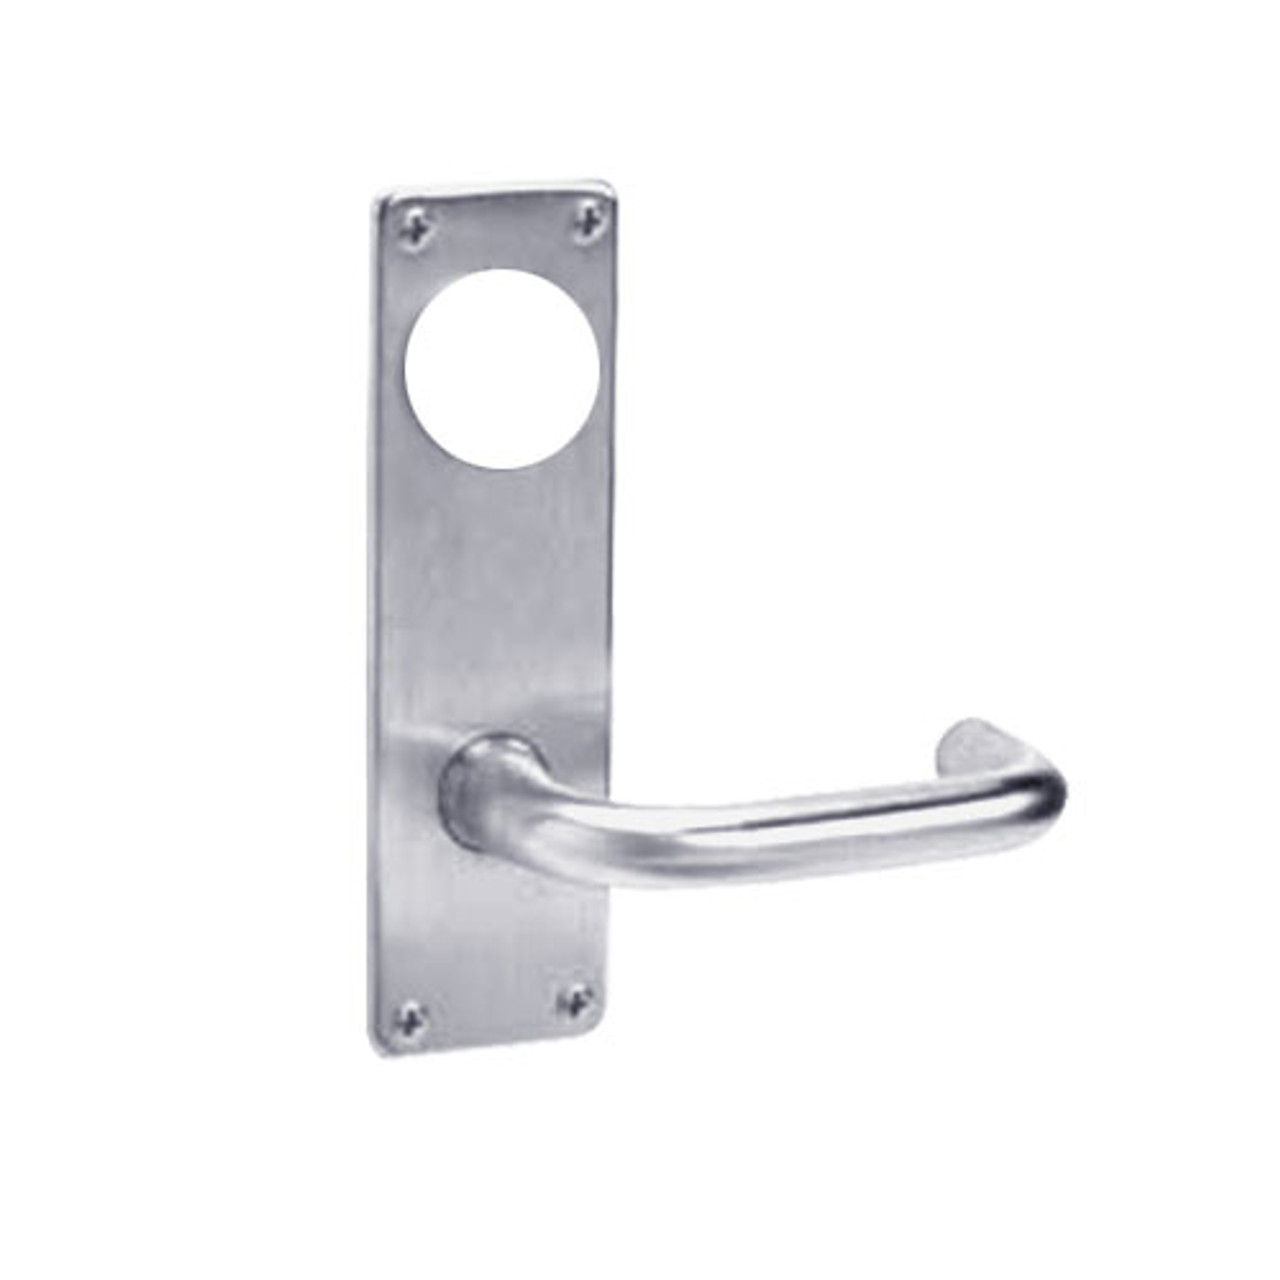 ML2065-LSN-626-M31 Corbin Russwin ML2000 Series Mortise Dormitory Trim Pack with Lustra Lever in Satin Chrome